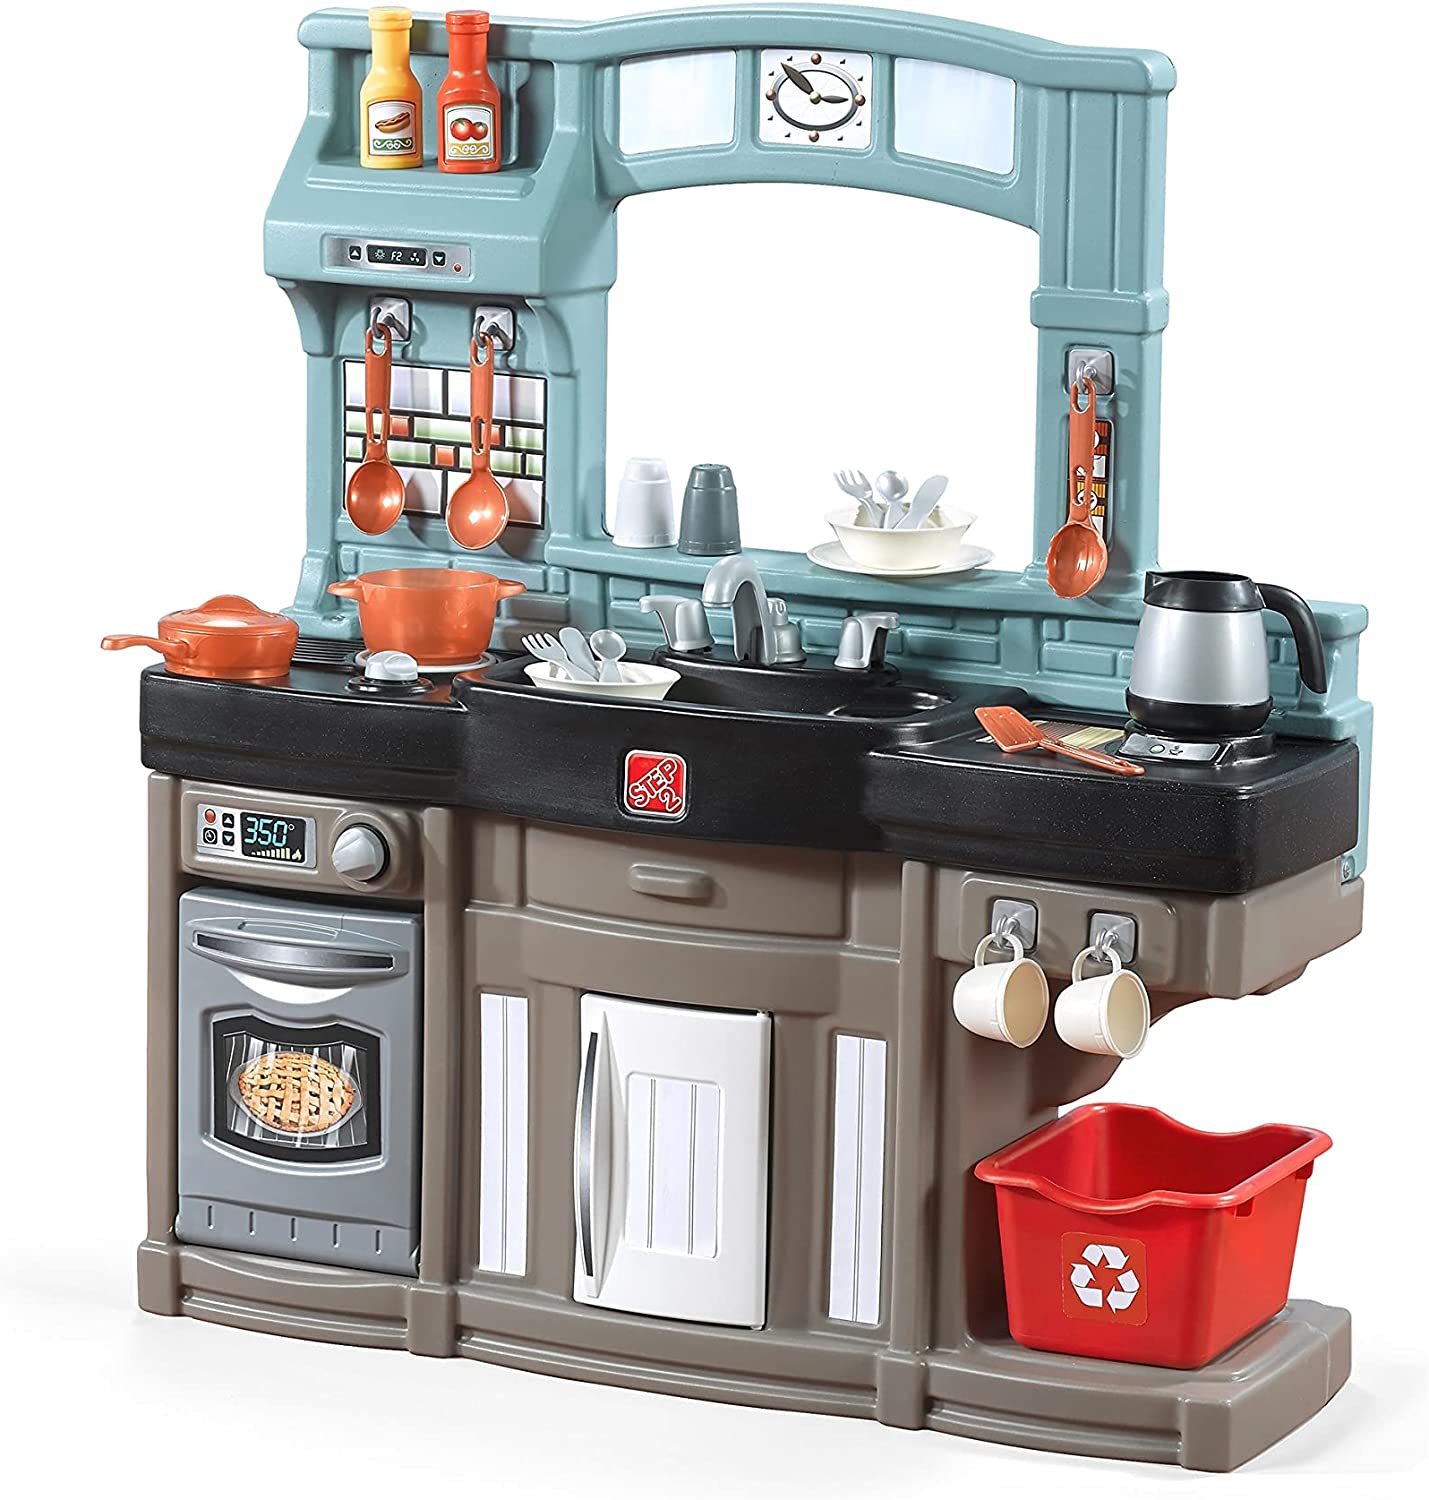 https://bigbigmart.com/wp-content/uploads/2023/05/Step2-Best-Chefs-Kitchen-Set-for-Kids-Blue-%E2%80%93-Includes-25-Toy-Kitchen-Accessories-Interactive-Features-for-Realistic-Pretend-Play-%E2%80%93-Indoor-Outdoor-Toddler-Playset.jpg